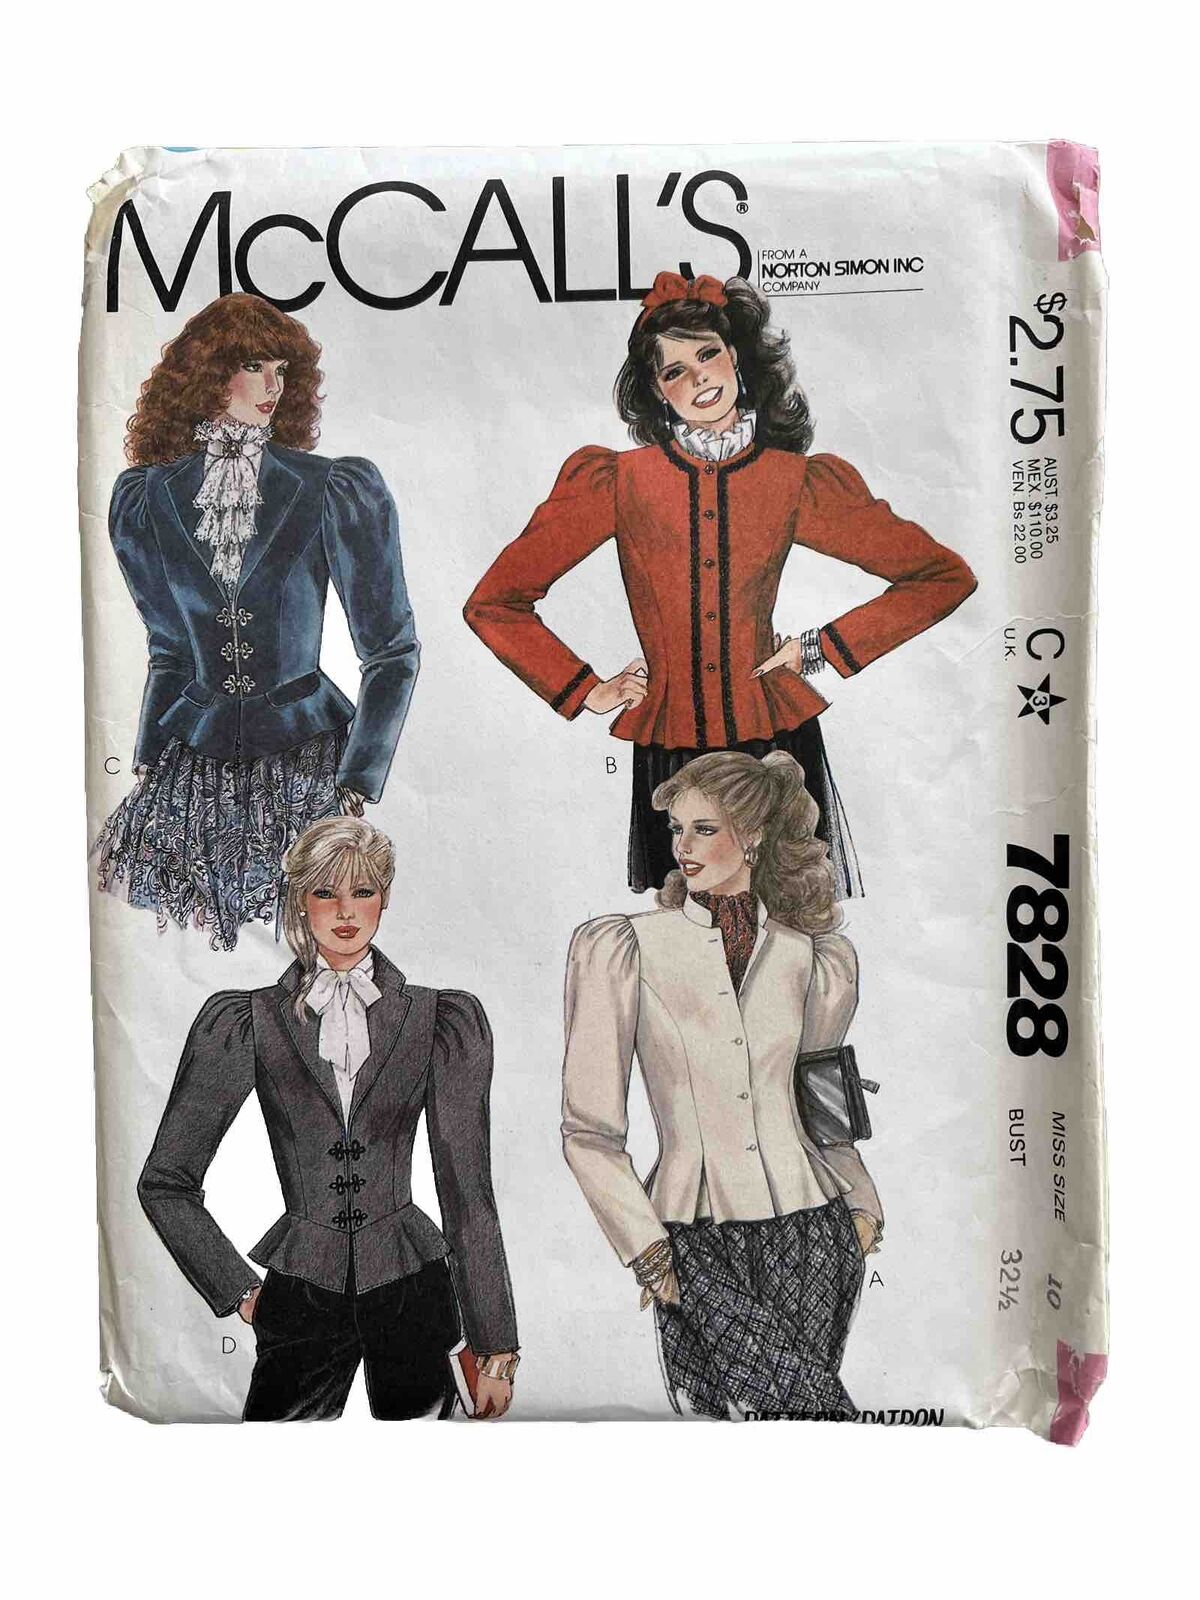 McCalls 7828 Fitted Jacket Shaped Seaming Standing Collar Sz 10 Bust 32.5 UNCUT